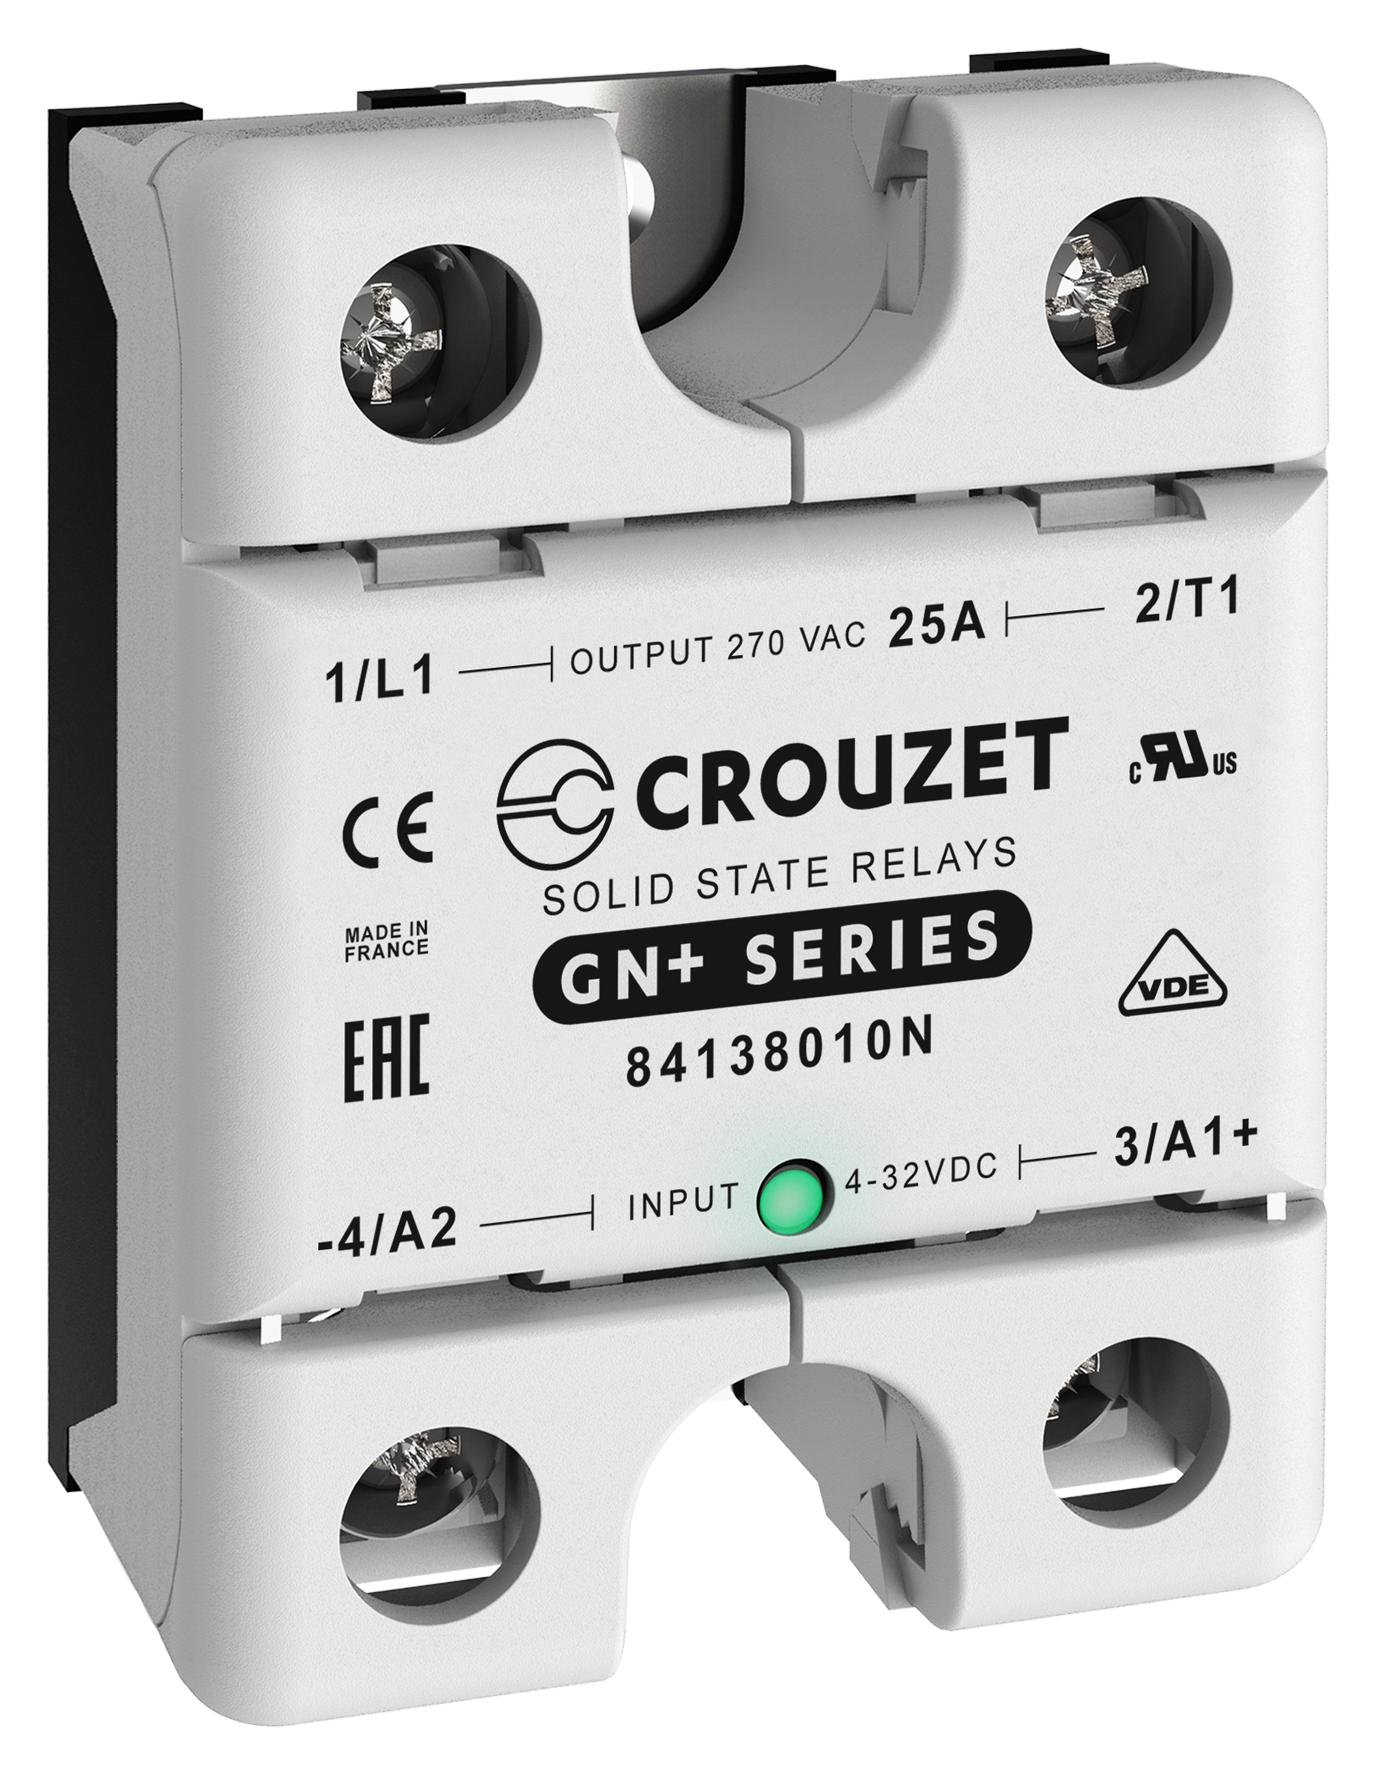 84138010N SOLID STATE RELAY, 25A, 12-270VAC, PANEL CROUZET